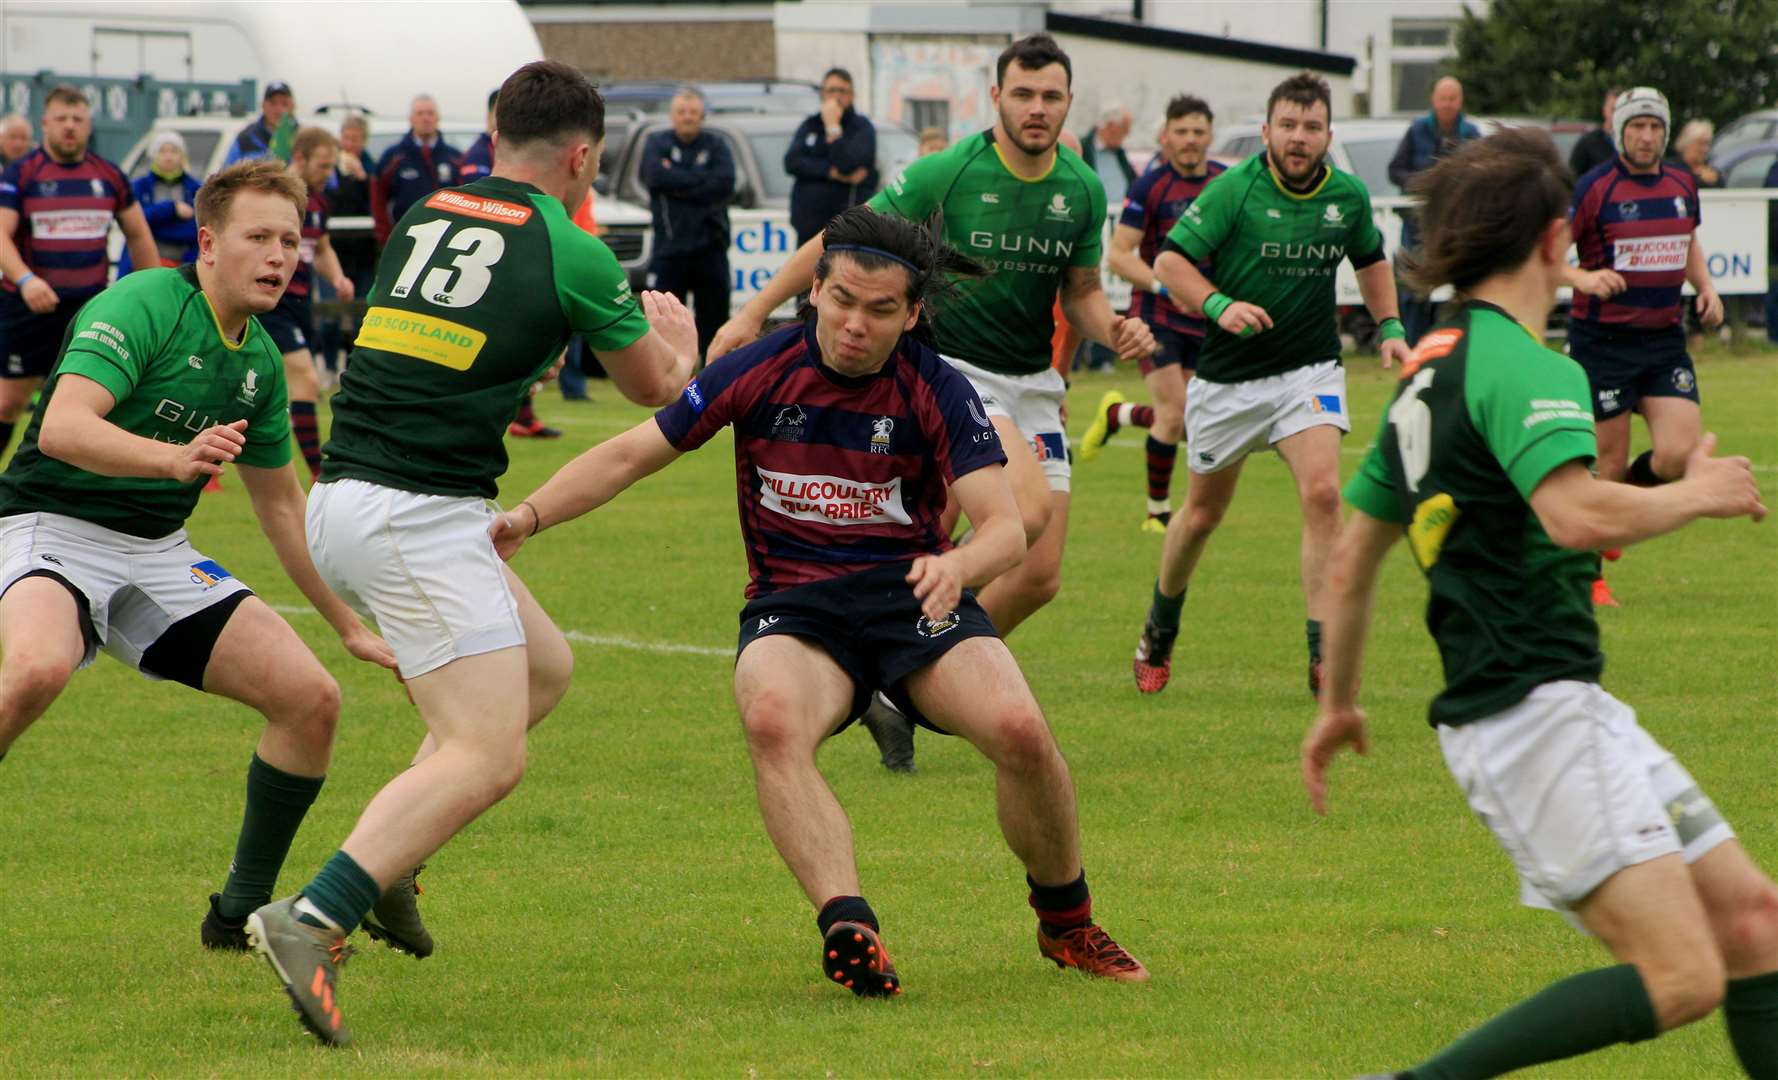 Caithness centre Charlie Quinn fending off a tackle during last season's home match against Hillfoots, who are back at Millbank this weekend. Picture: Alan Hendry